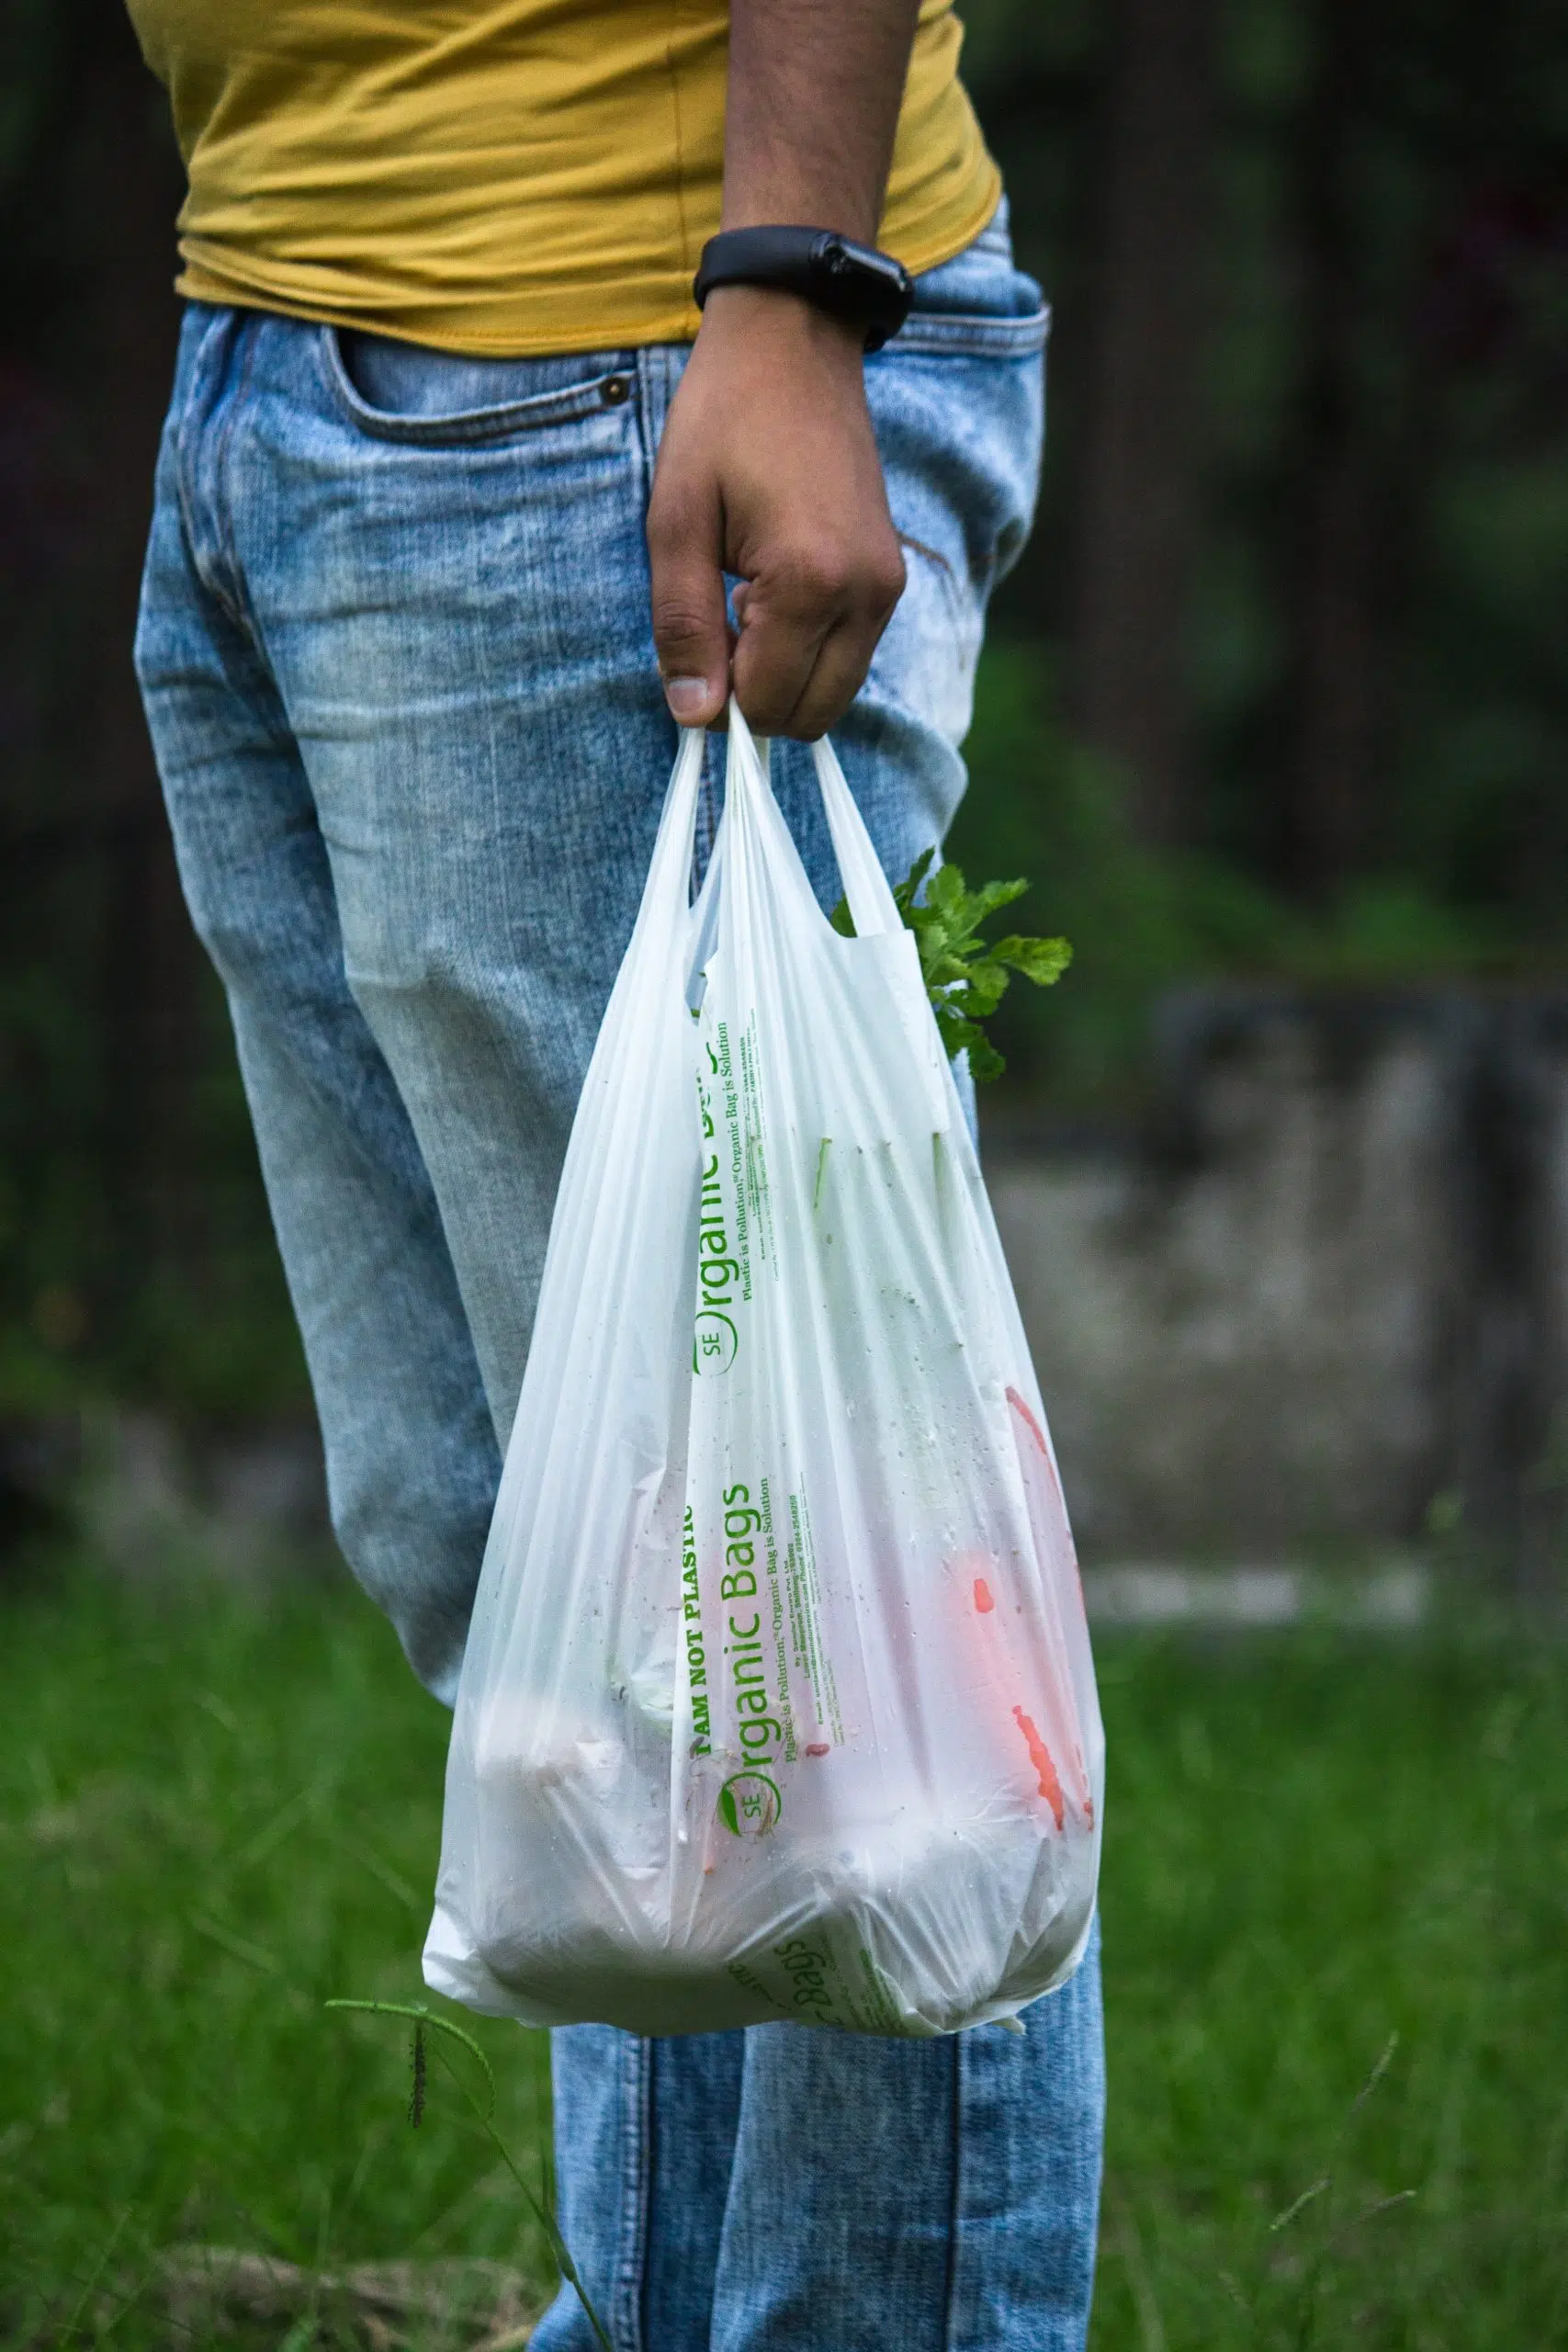 Single use plastic bags in Louisiana could be thing of the past if one lawmaker has his way